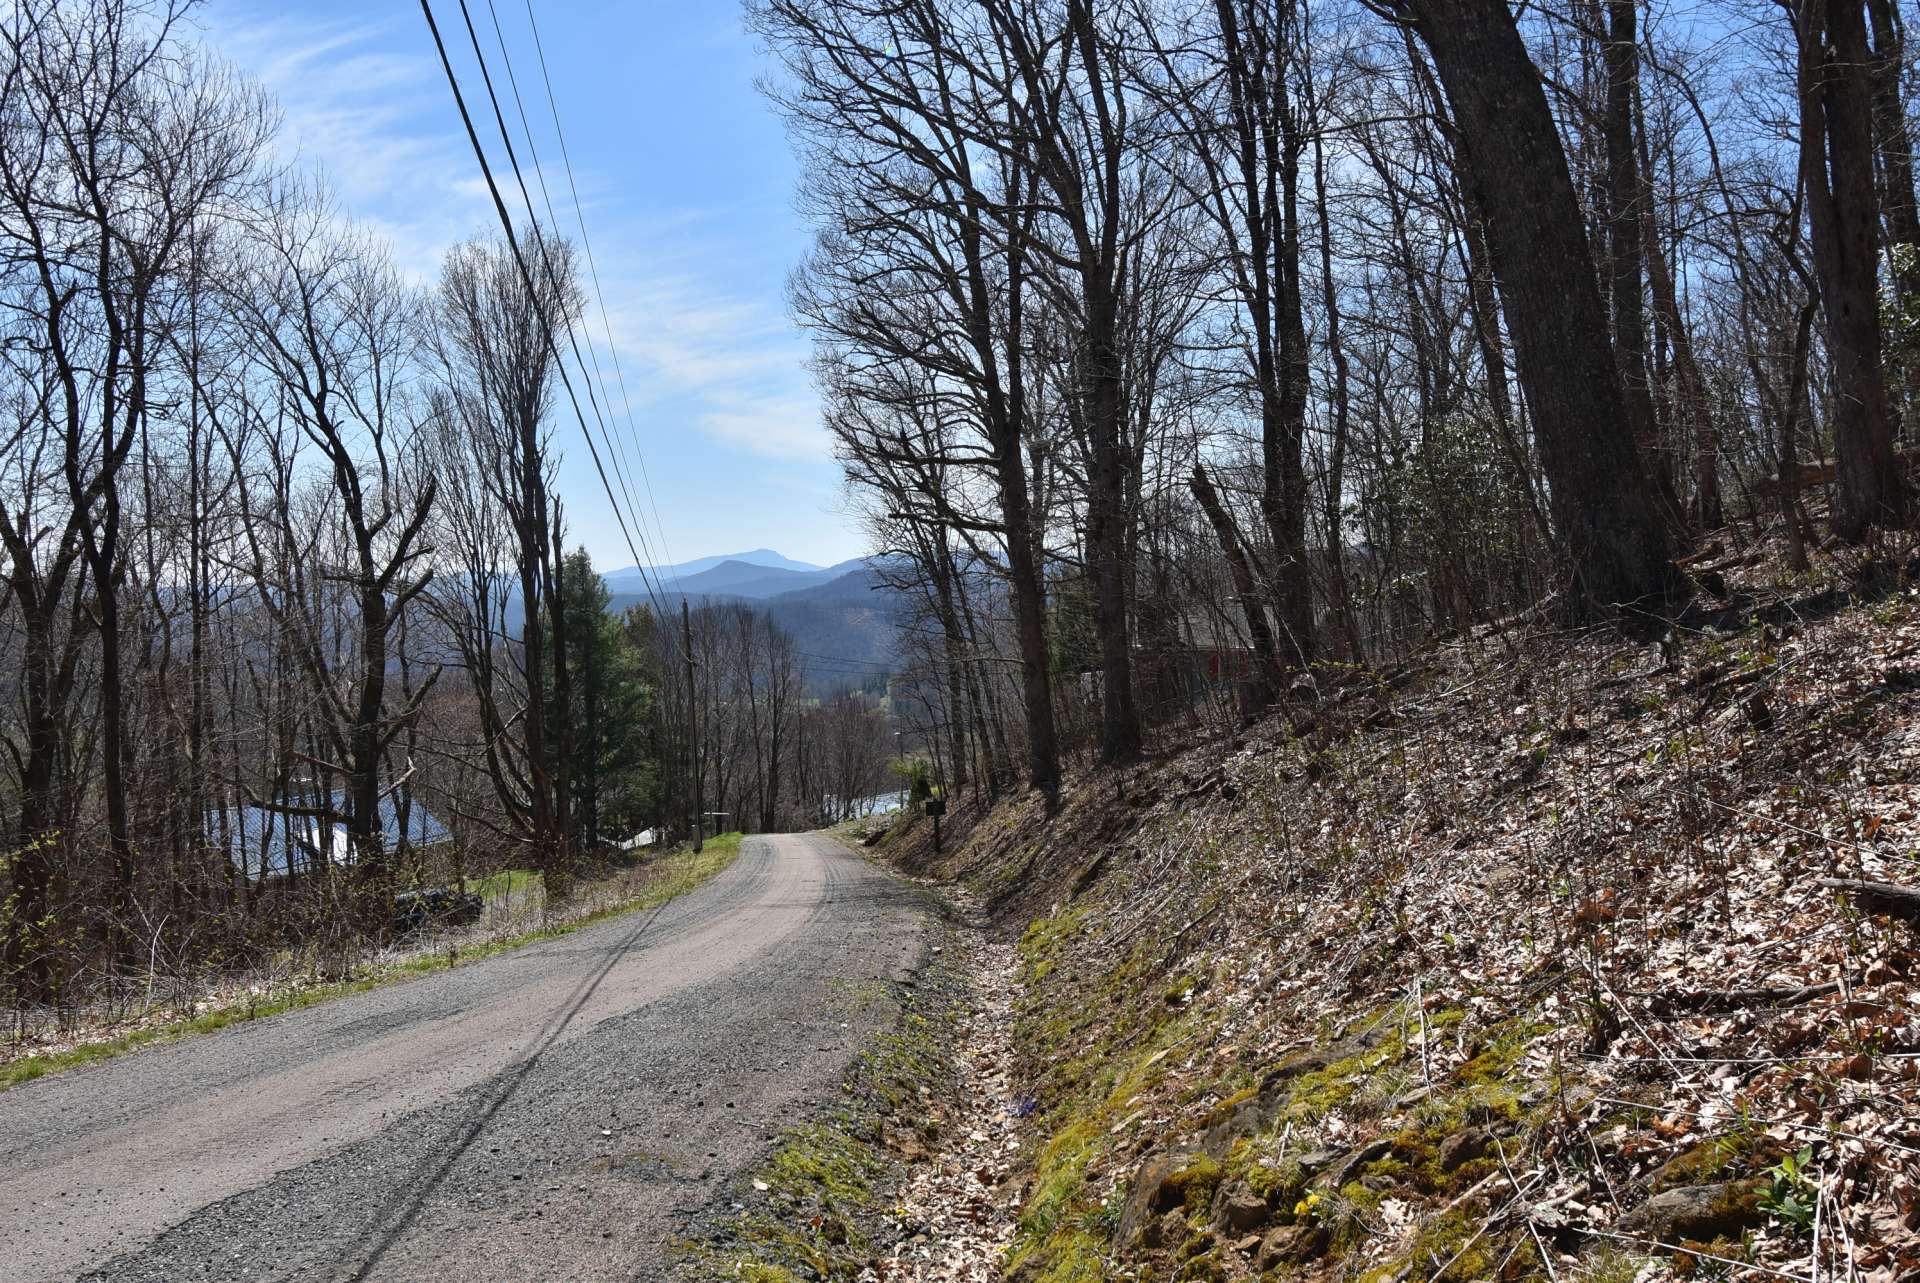 A private graveled road leads into the community where you will find a sense of  a close knit neighborhood offering a great location central to both Boone and West Jefferson.